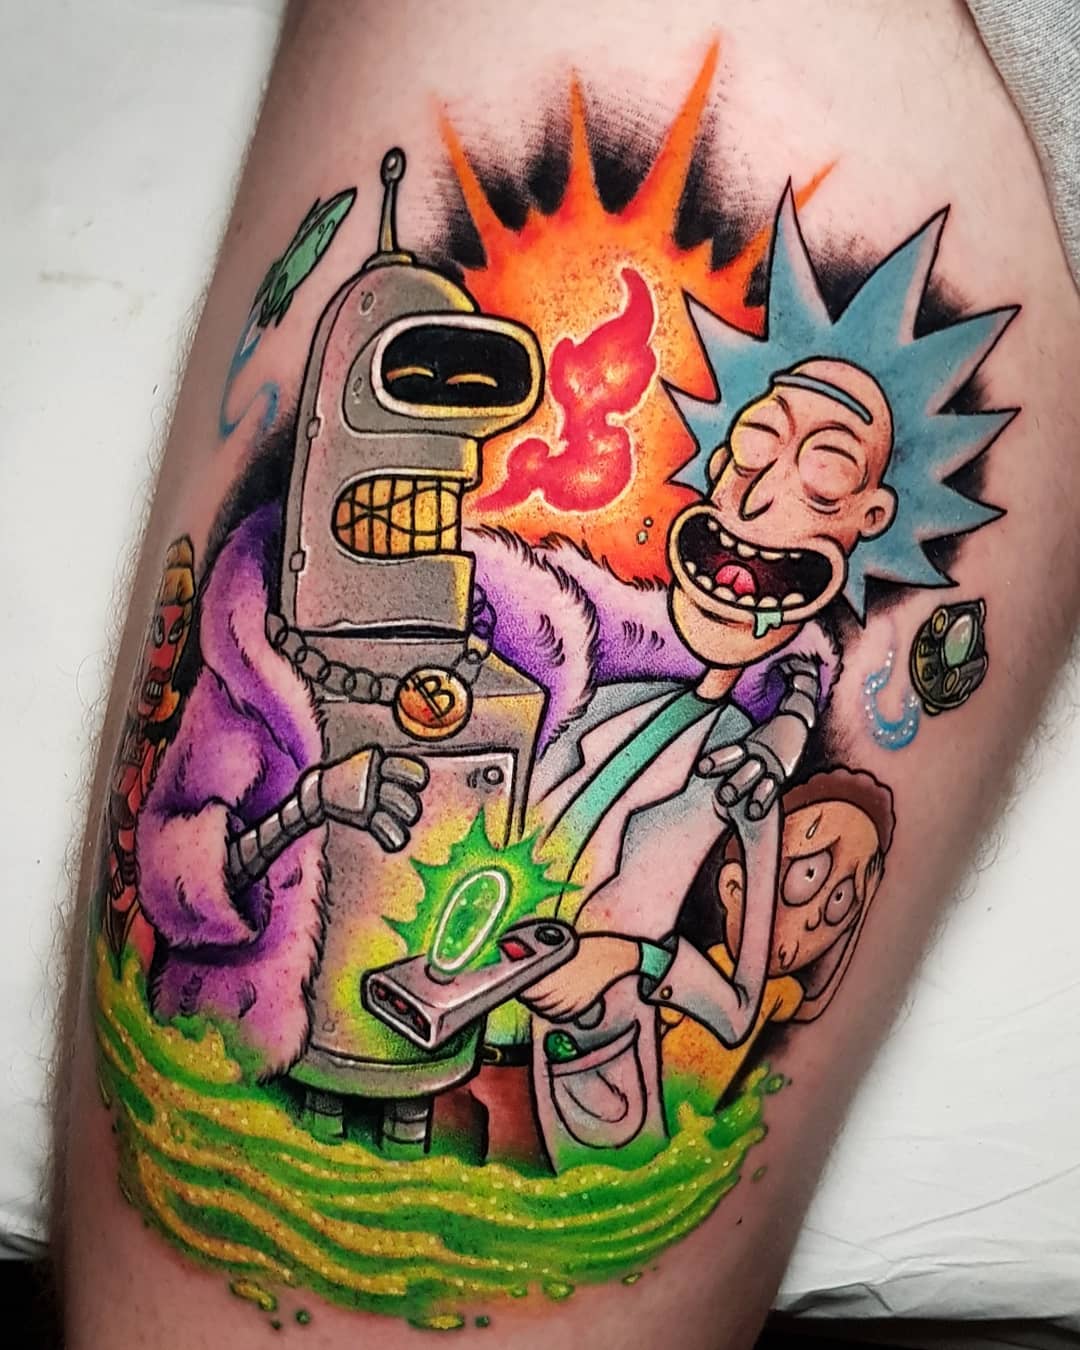 21 Rick and Morty's tattoos iNKPPL.